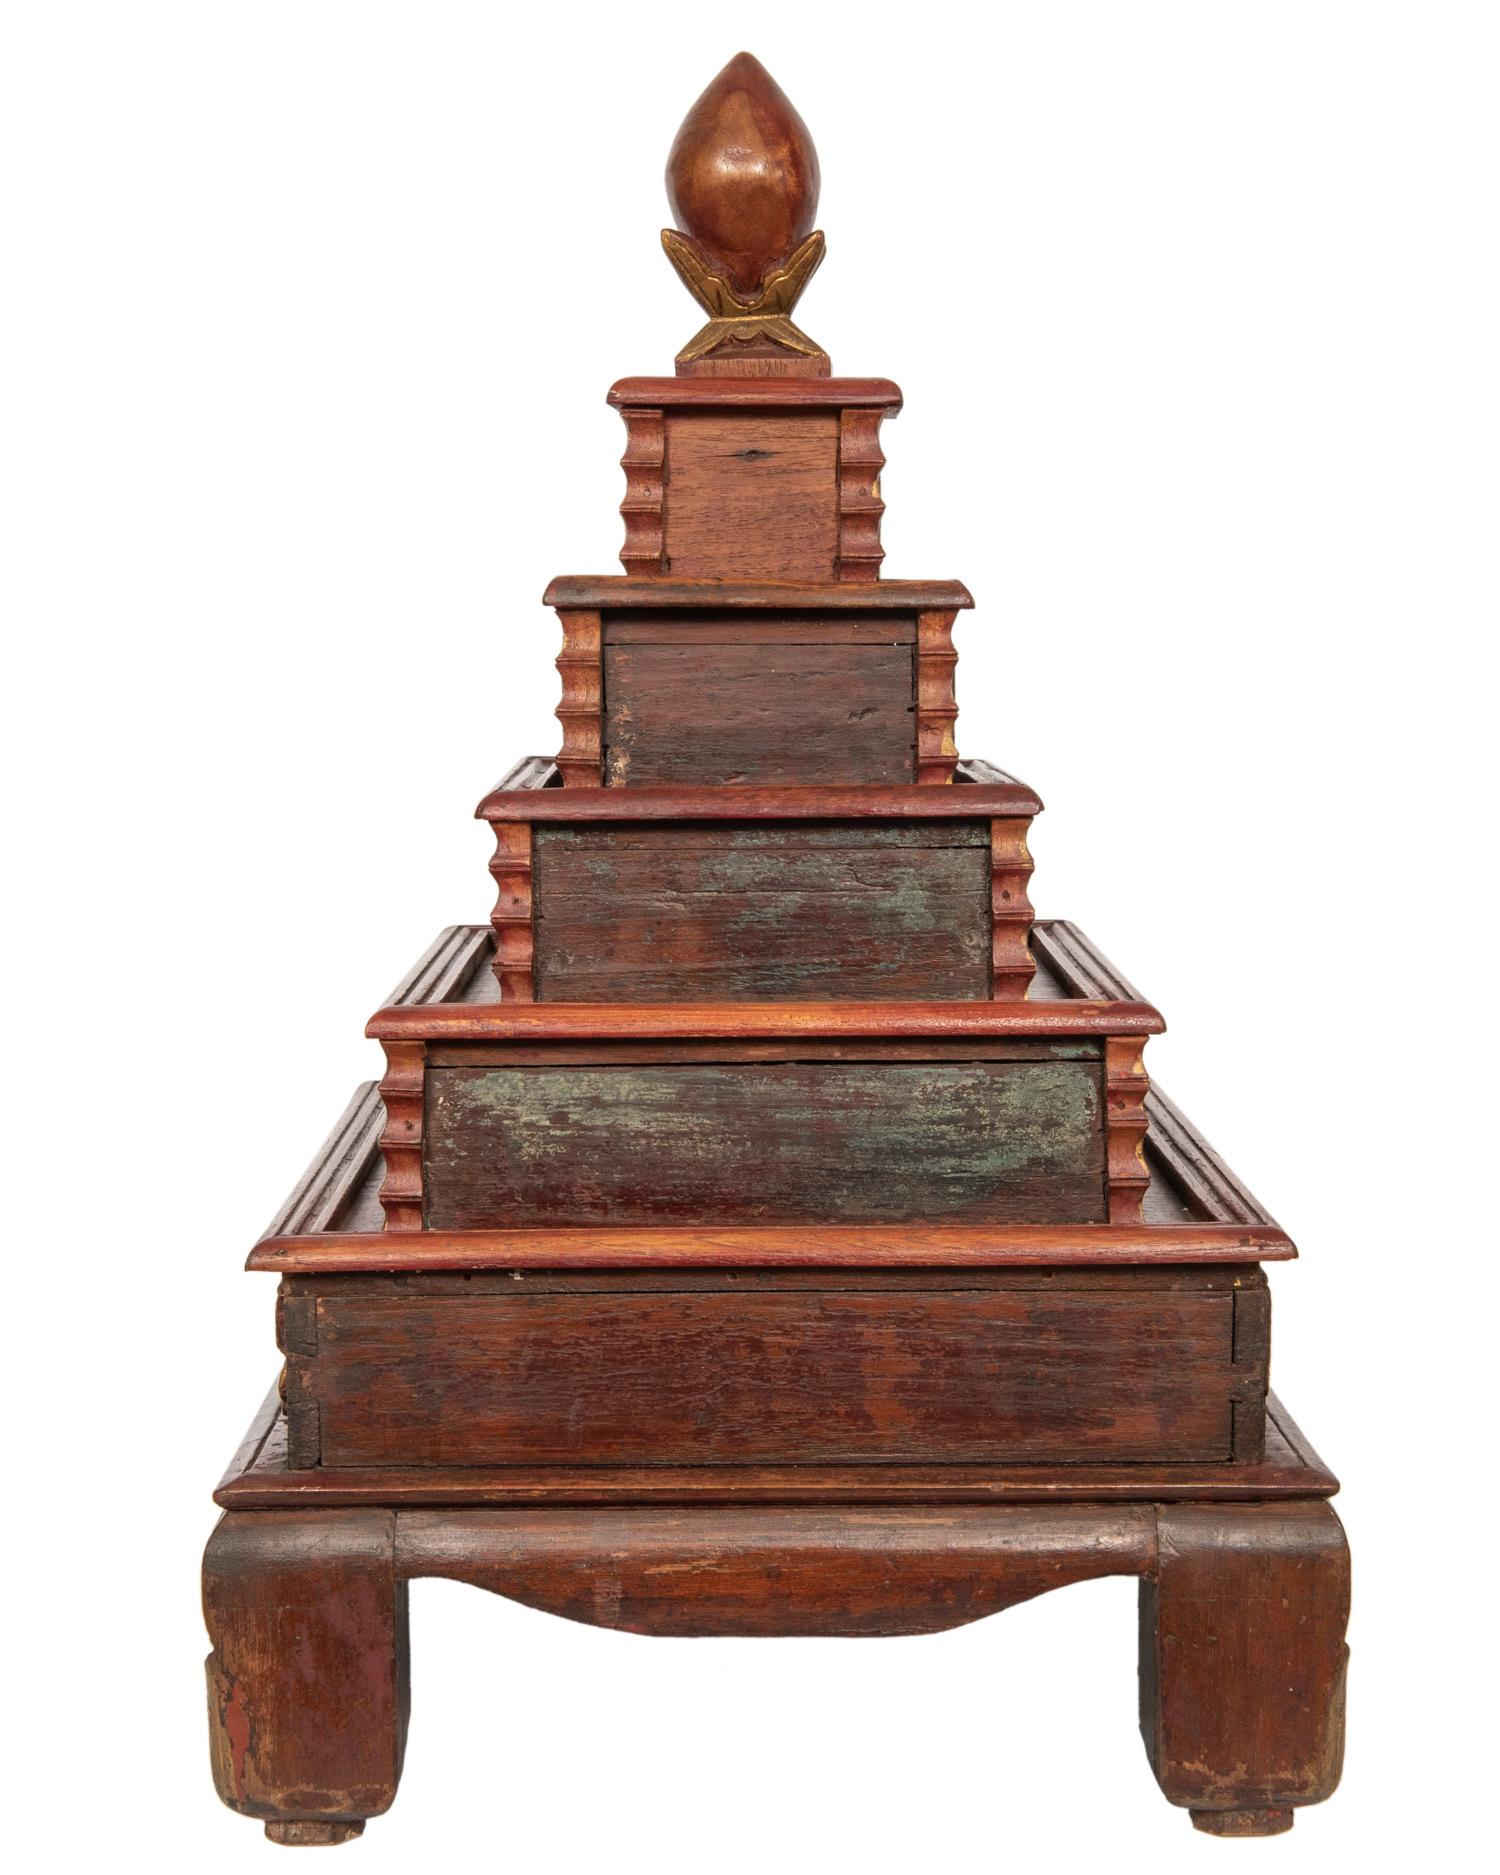 This highly decorative red and gold painted wood stacking pyramid box contains five graduated
drawers with brass pulls.